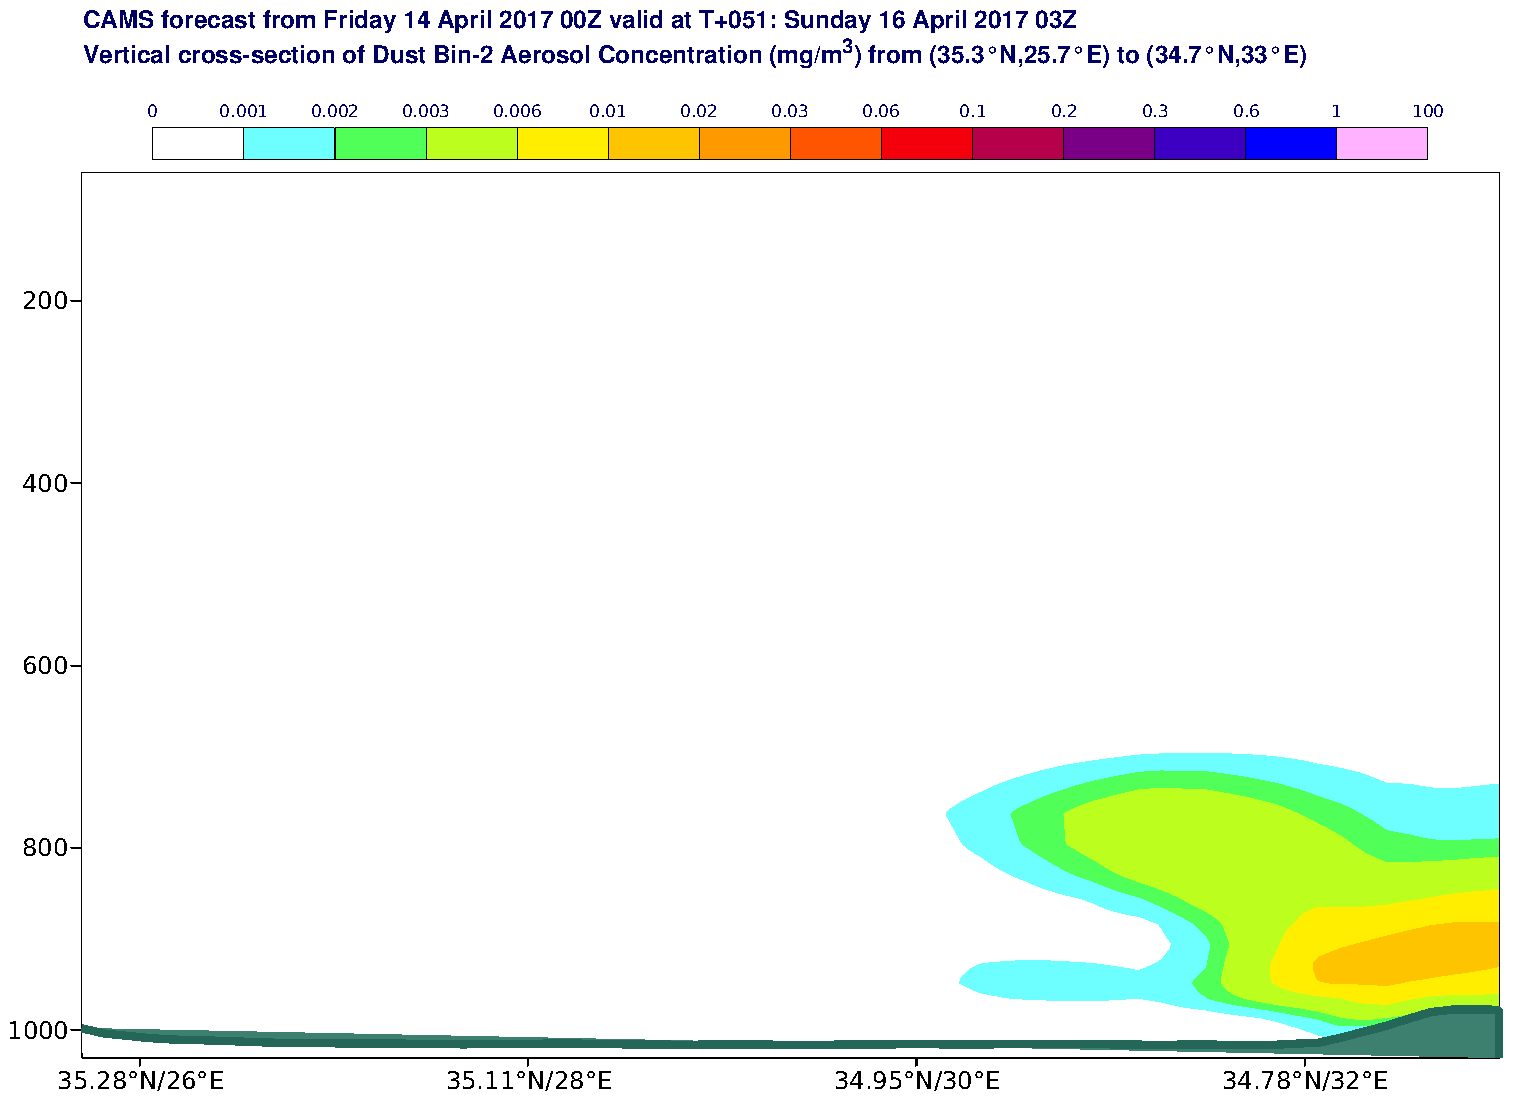 Vertical cross-section of Dust Bin-2 Aerosol Concentration (mg/m3) valid at T51 - 2017-04-16 03:00